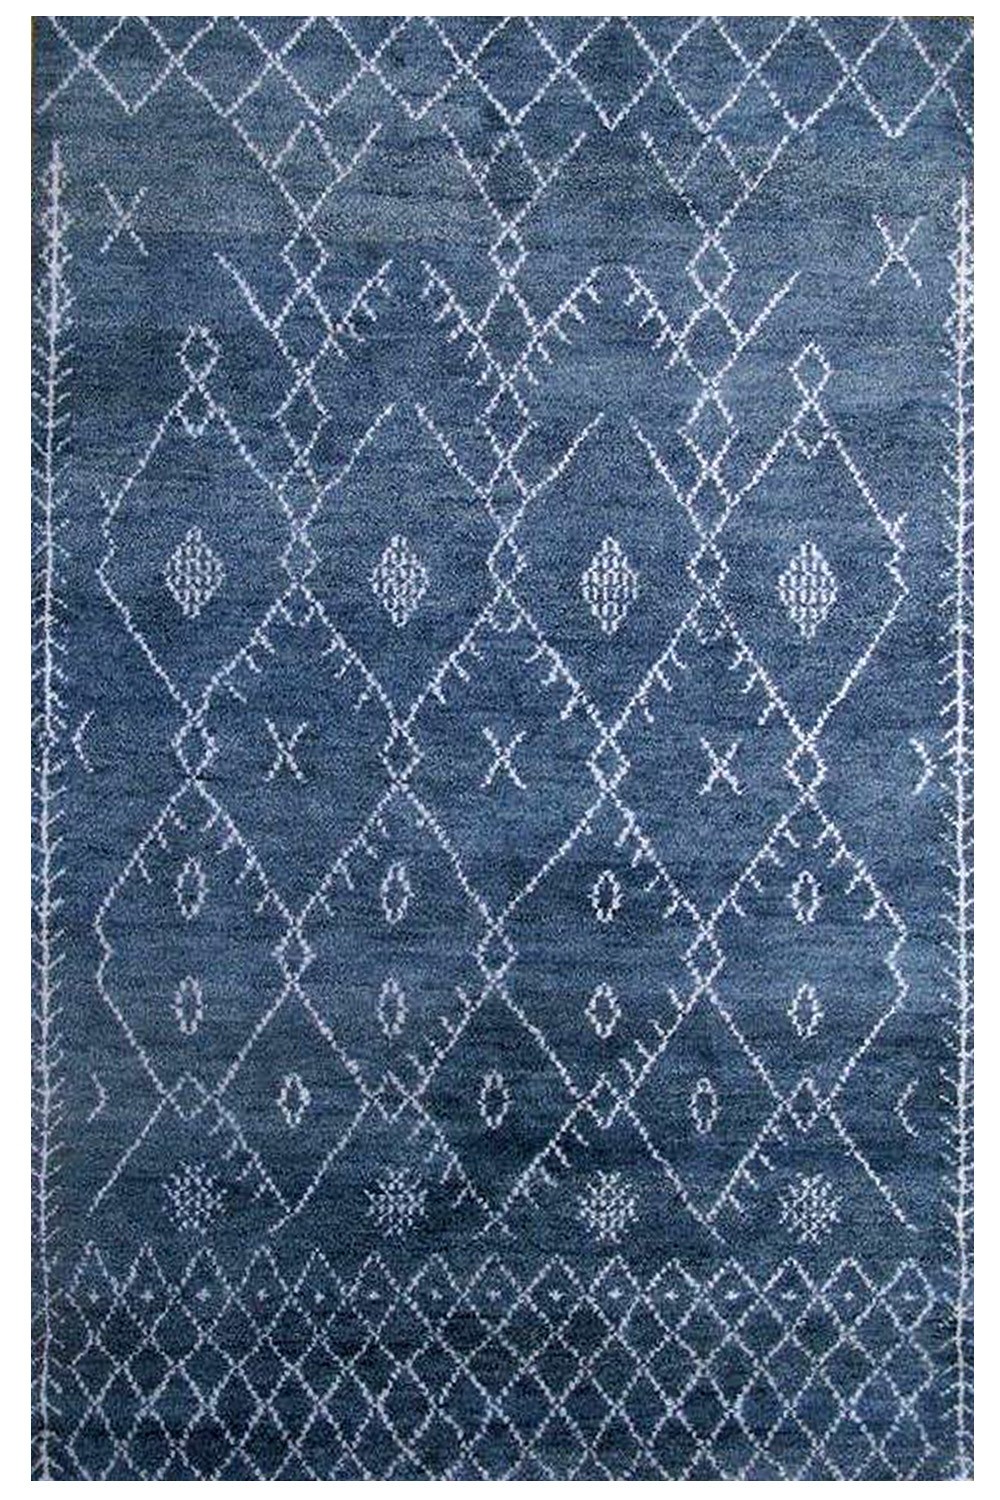 Buy Blue Denim Handknotted Moroccan Area Rug